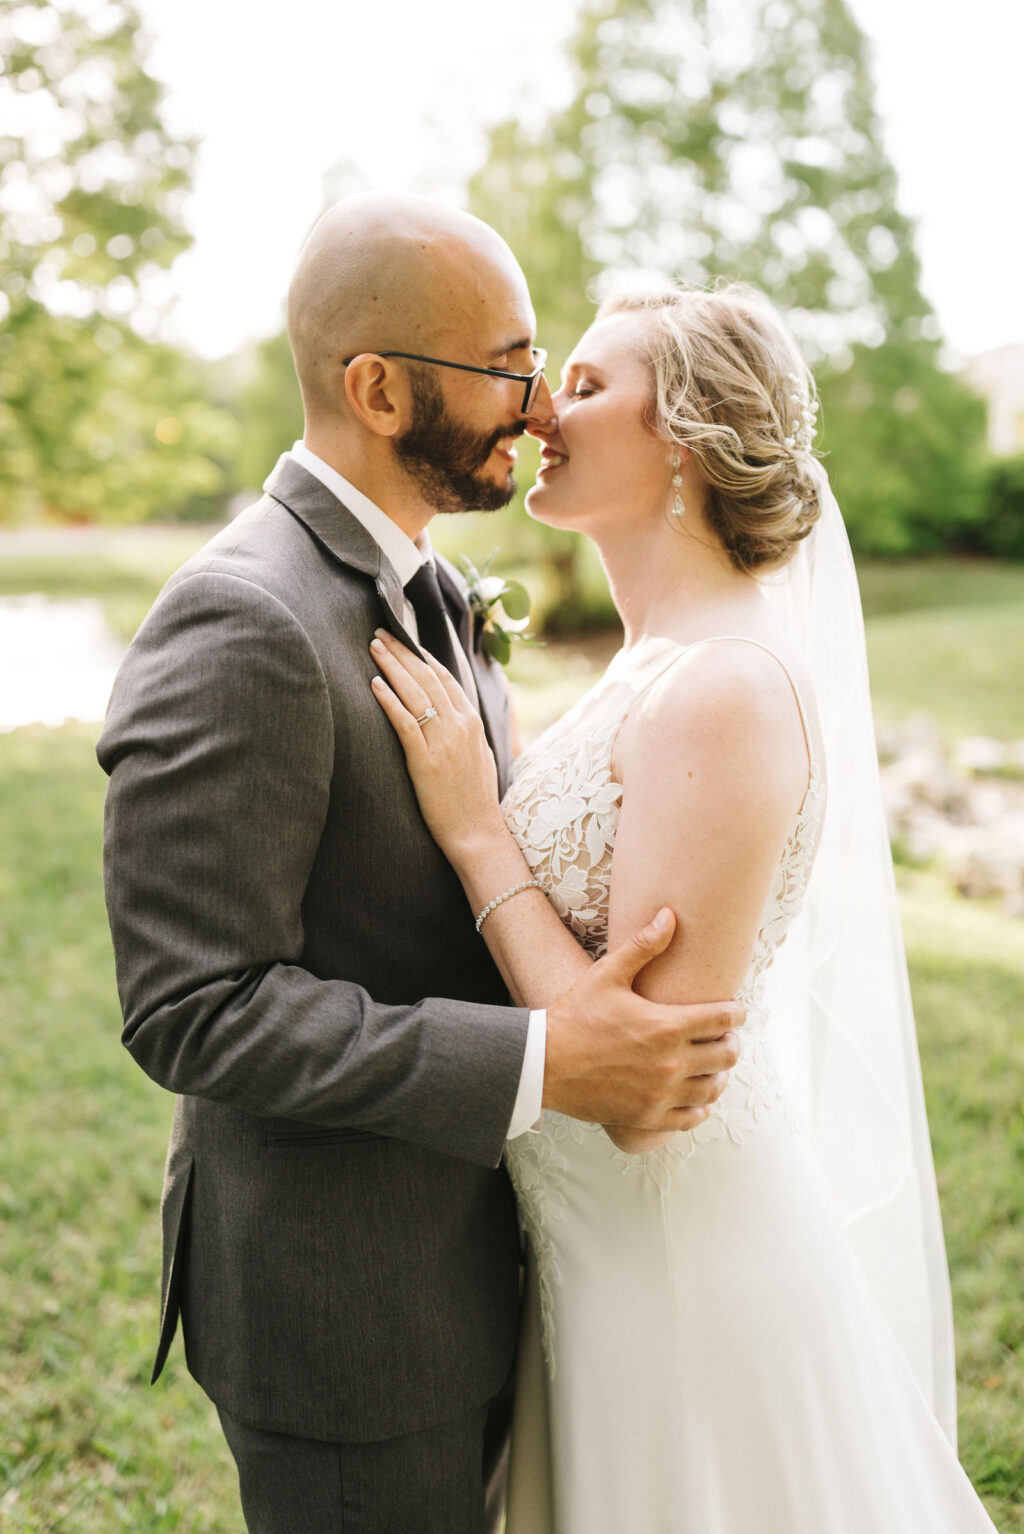 Bride and Groom Outdoor Wedding Portrait | Sheath Satin Charmeuse V Neck Lace Bodice Spaghetti Strap Bridal Gown | Groom Wearing Classic Charcoal Grey Suit | Michele Renee the Studio